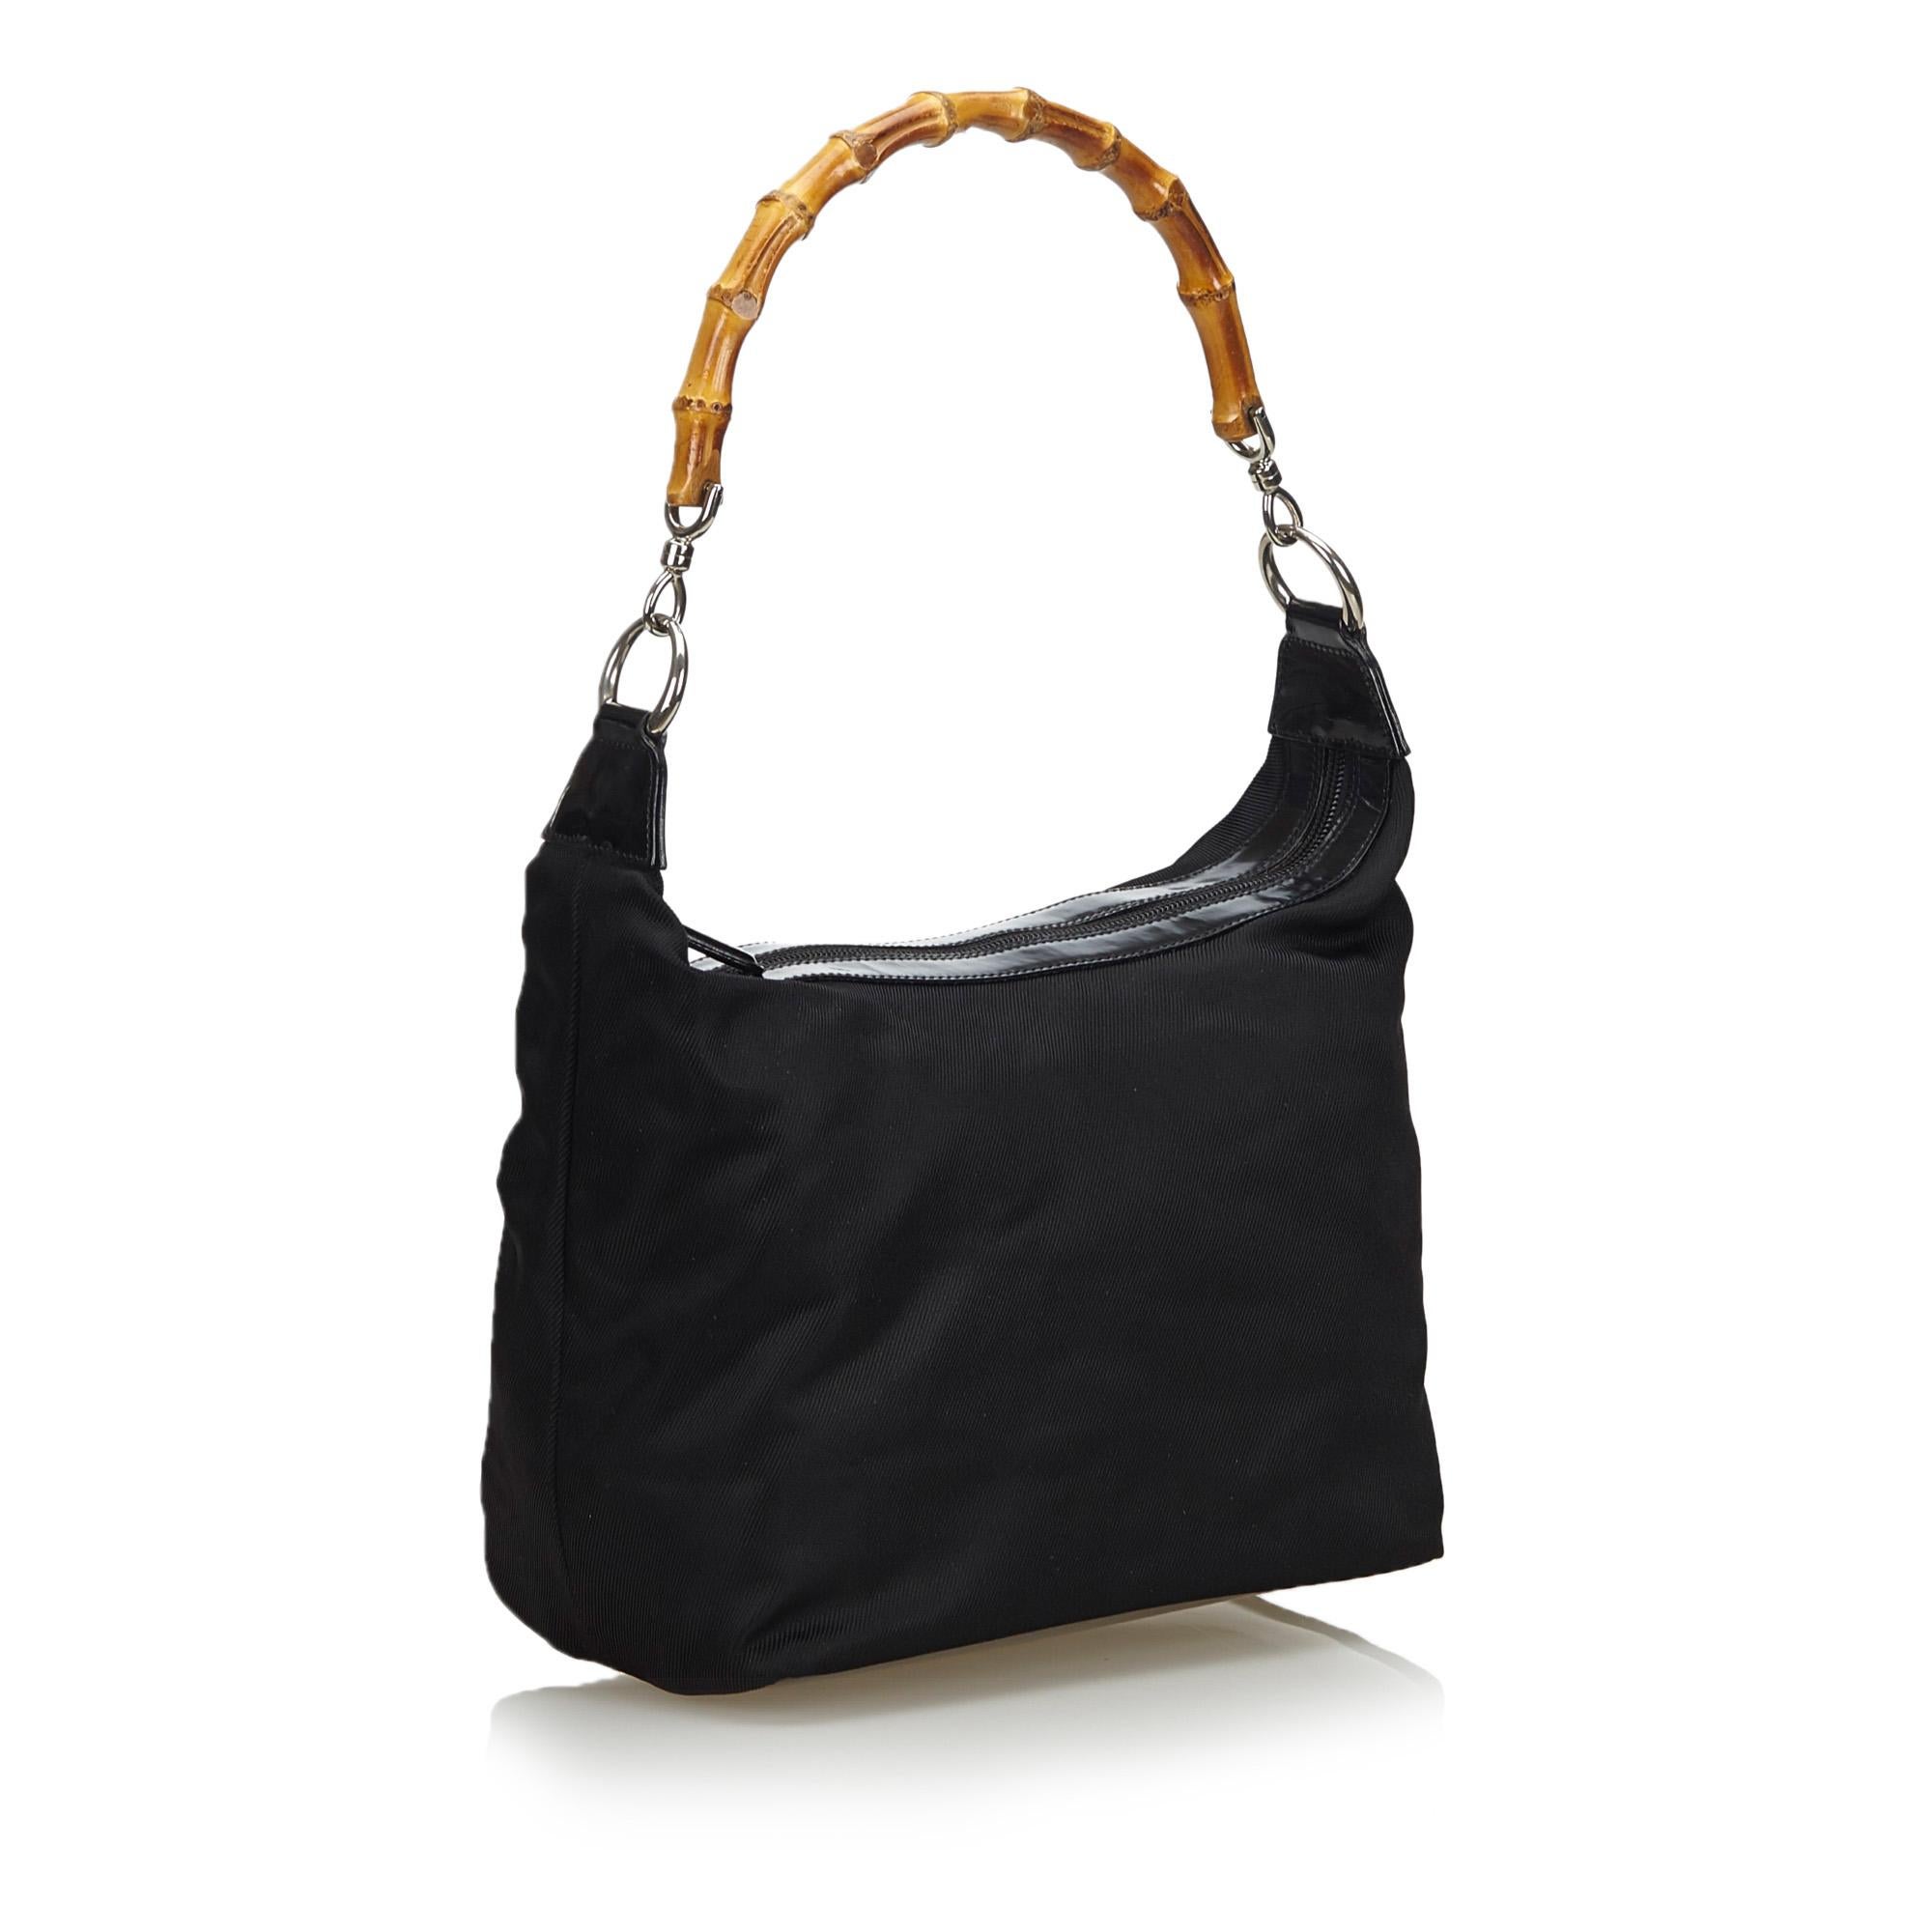 This shoulder bag features a nylon body, bamboo top handles, a top zip closure, and an interior zip pocket. It carries as B+ condition rating.

Inclusions: 
This item does not come with inclusions.

Dimensions:
Length: 18.00 cm
Width: 33.00